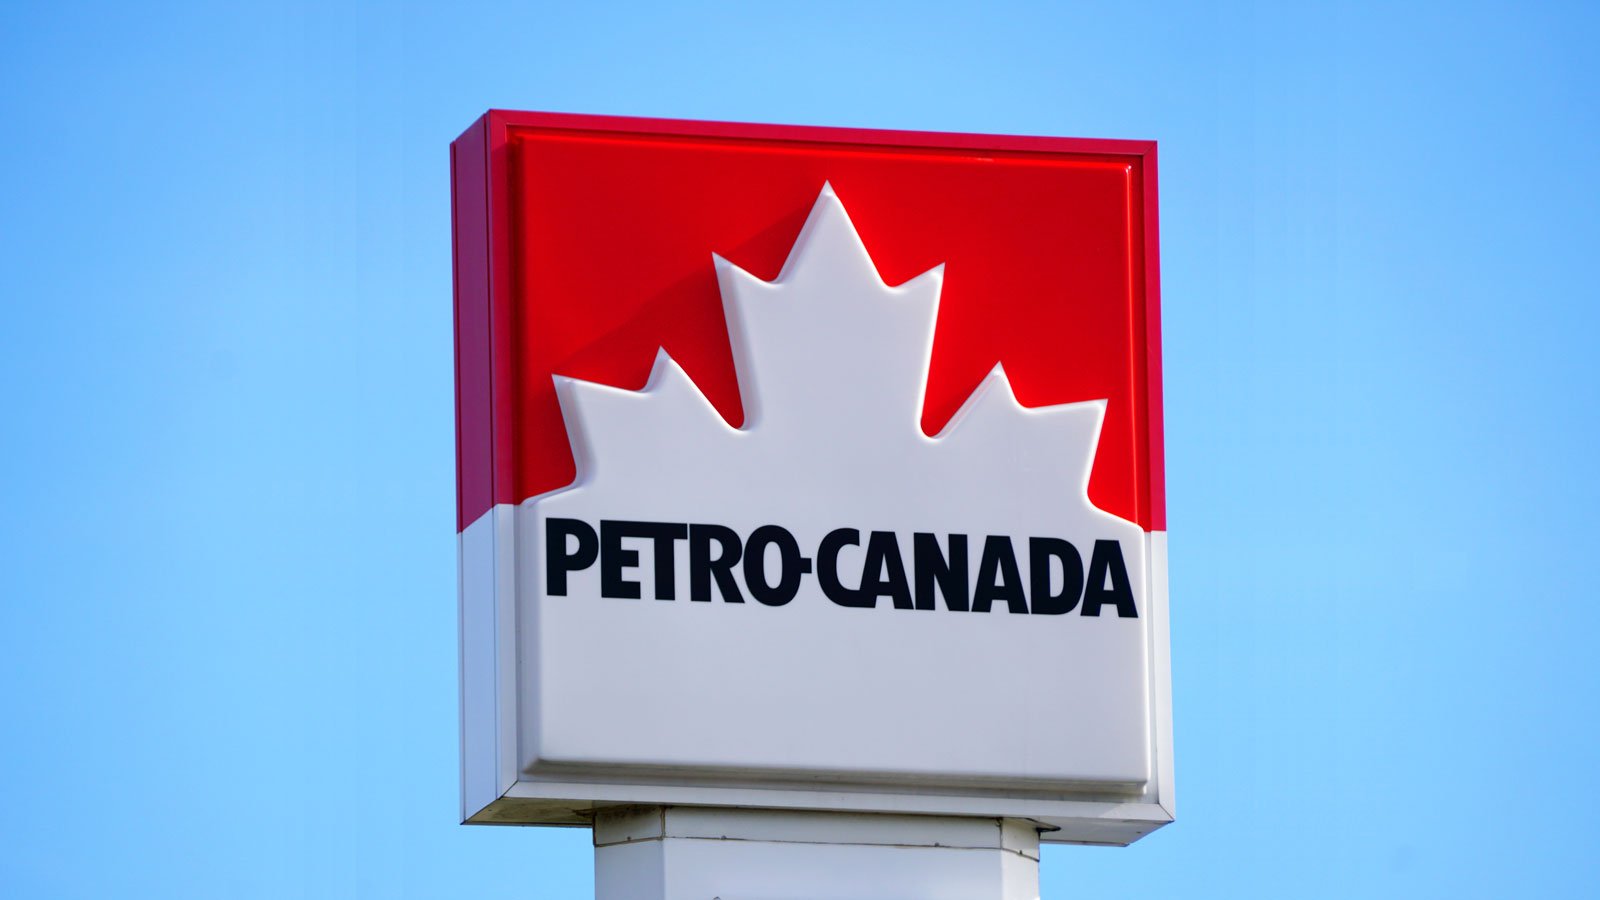 Energy company Suncor suffered a cyber attack and its company Petro-Canada gas reported problems at its gas stations in Canada